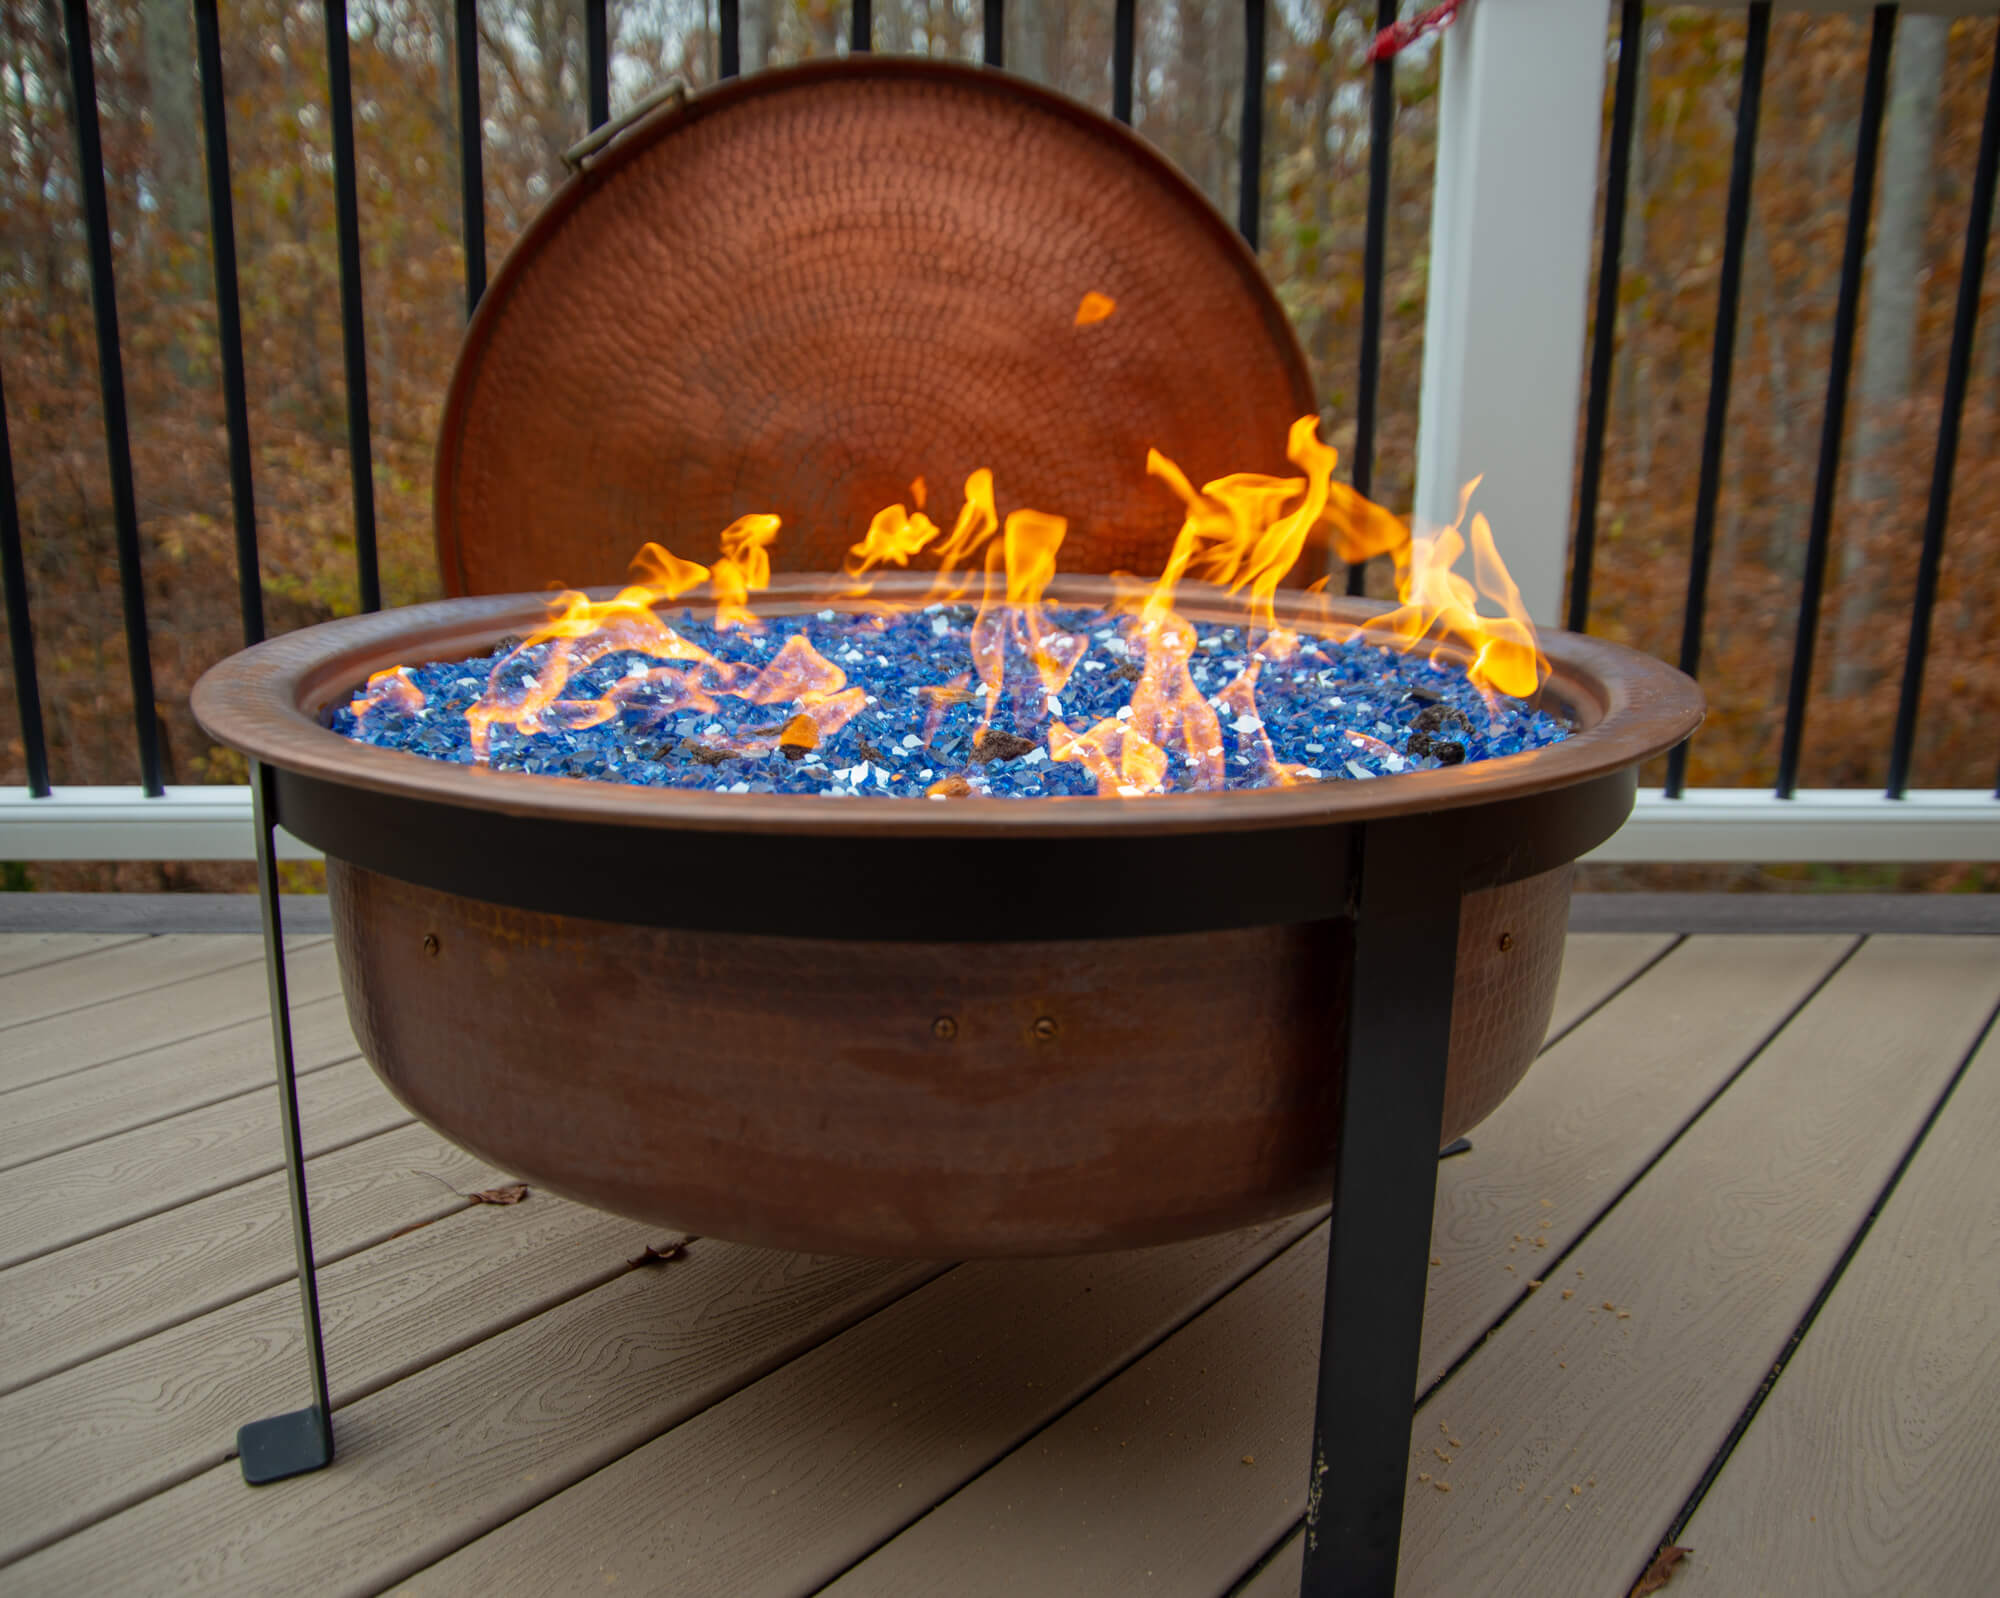 6 Ways To Put A Fire Pit On Wooden Deck, Mat To Put Under Fire Pit